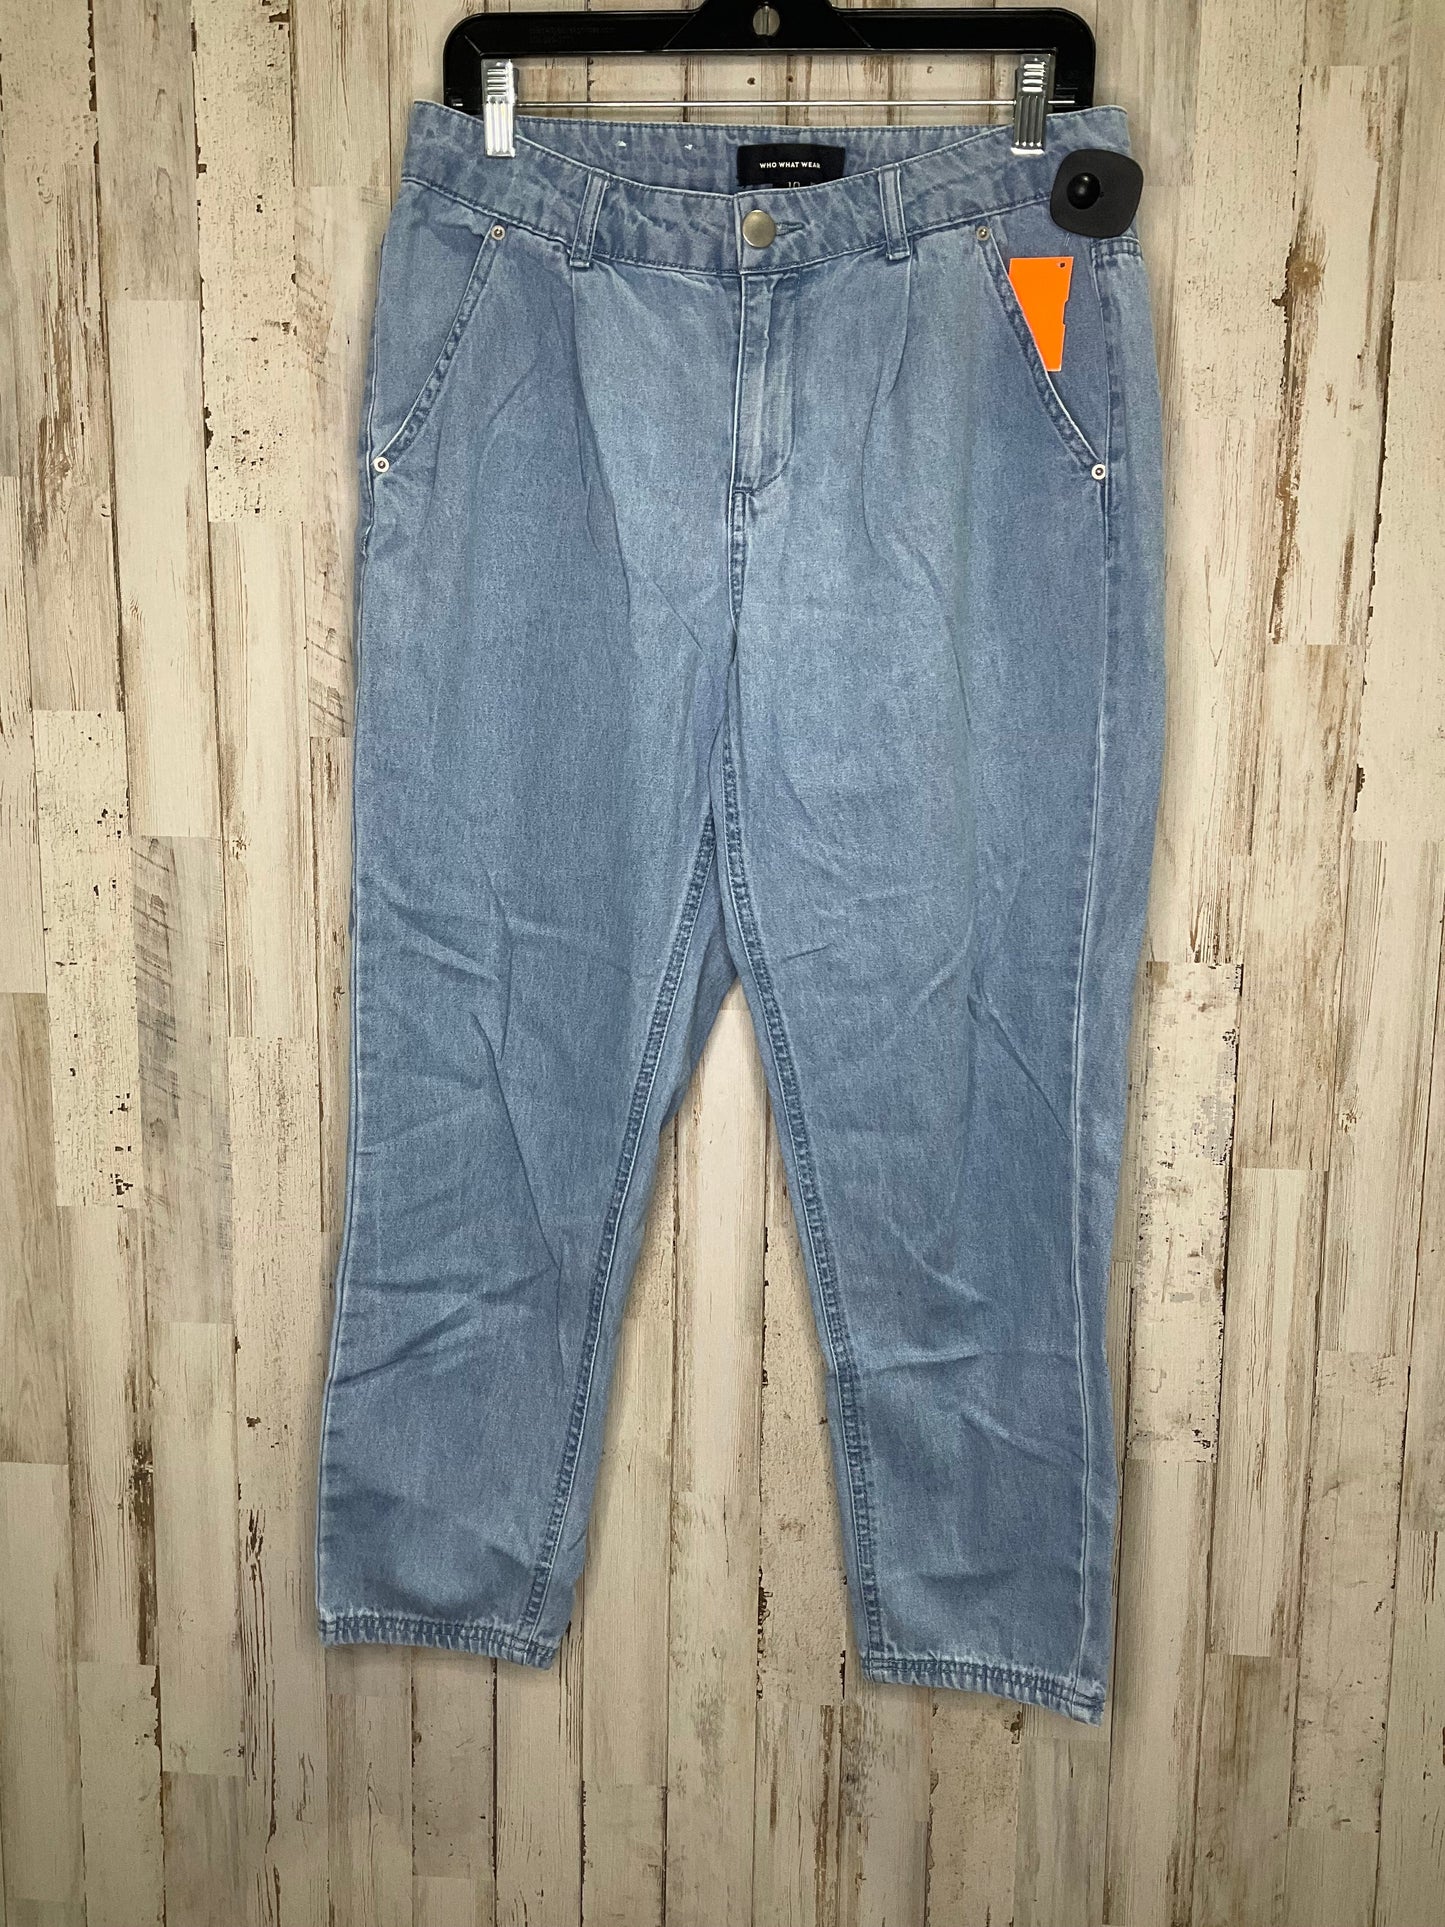 Jeans Relaxed/boyfriend By Who What Wear  Size: 10